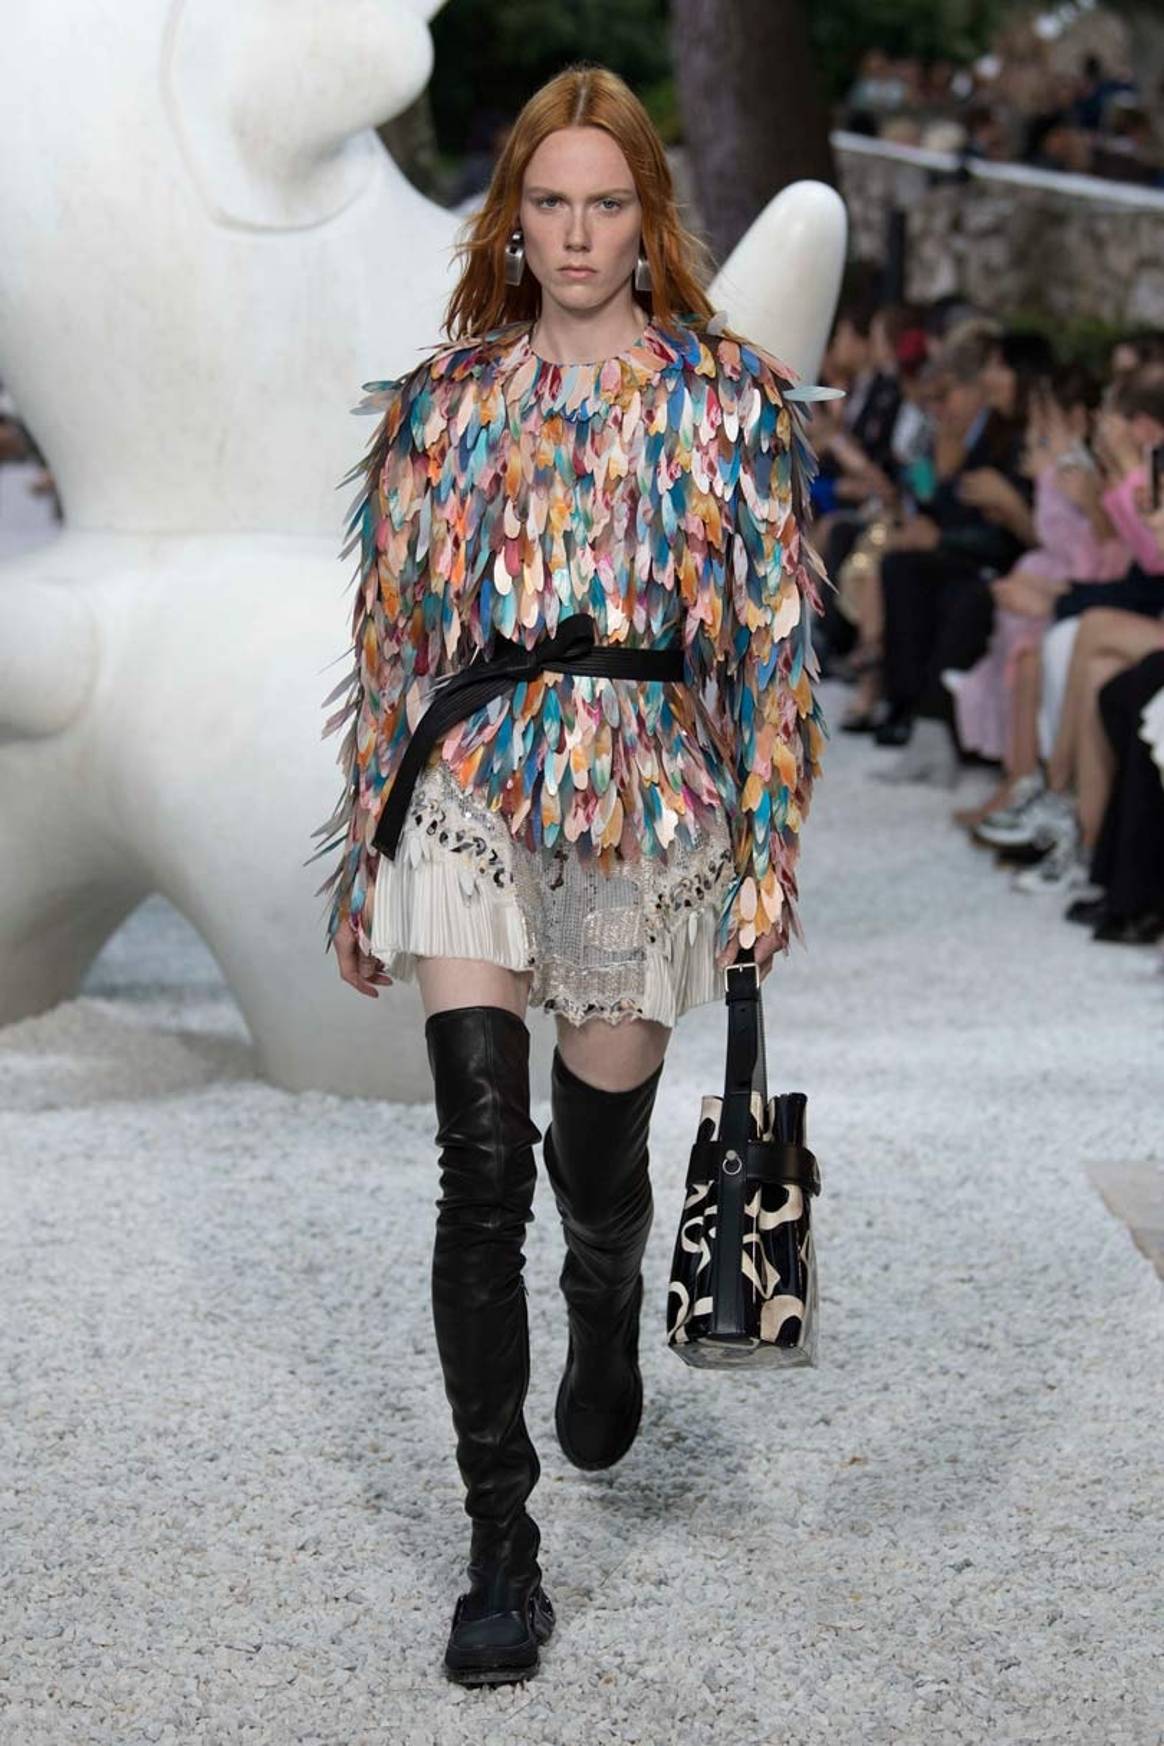 In Pictures: Louis Vuitton Cruise 2019 collection